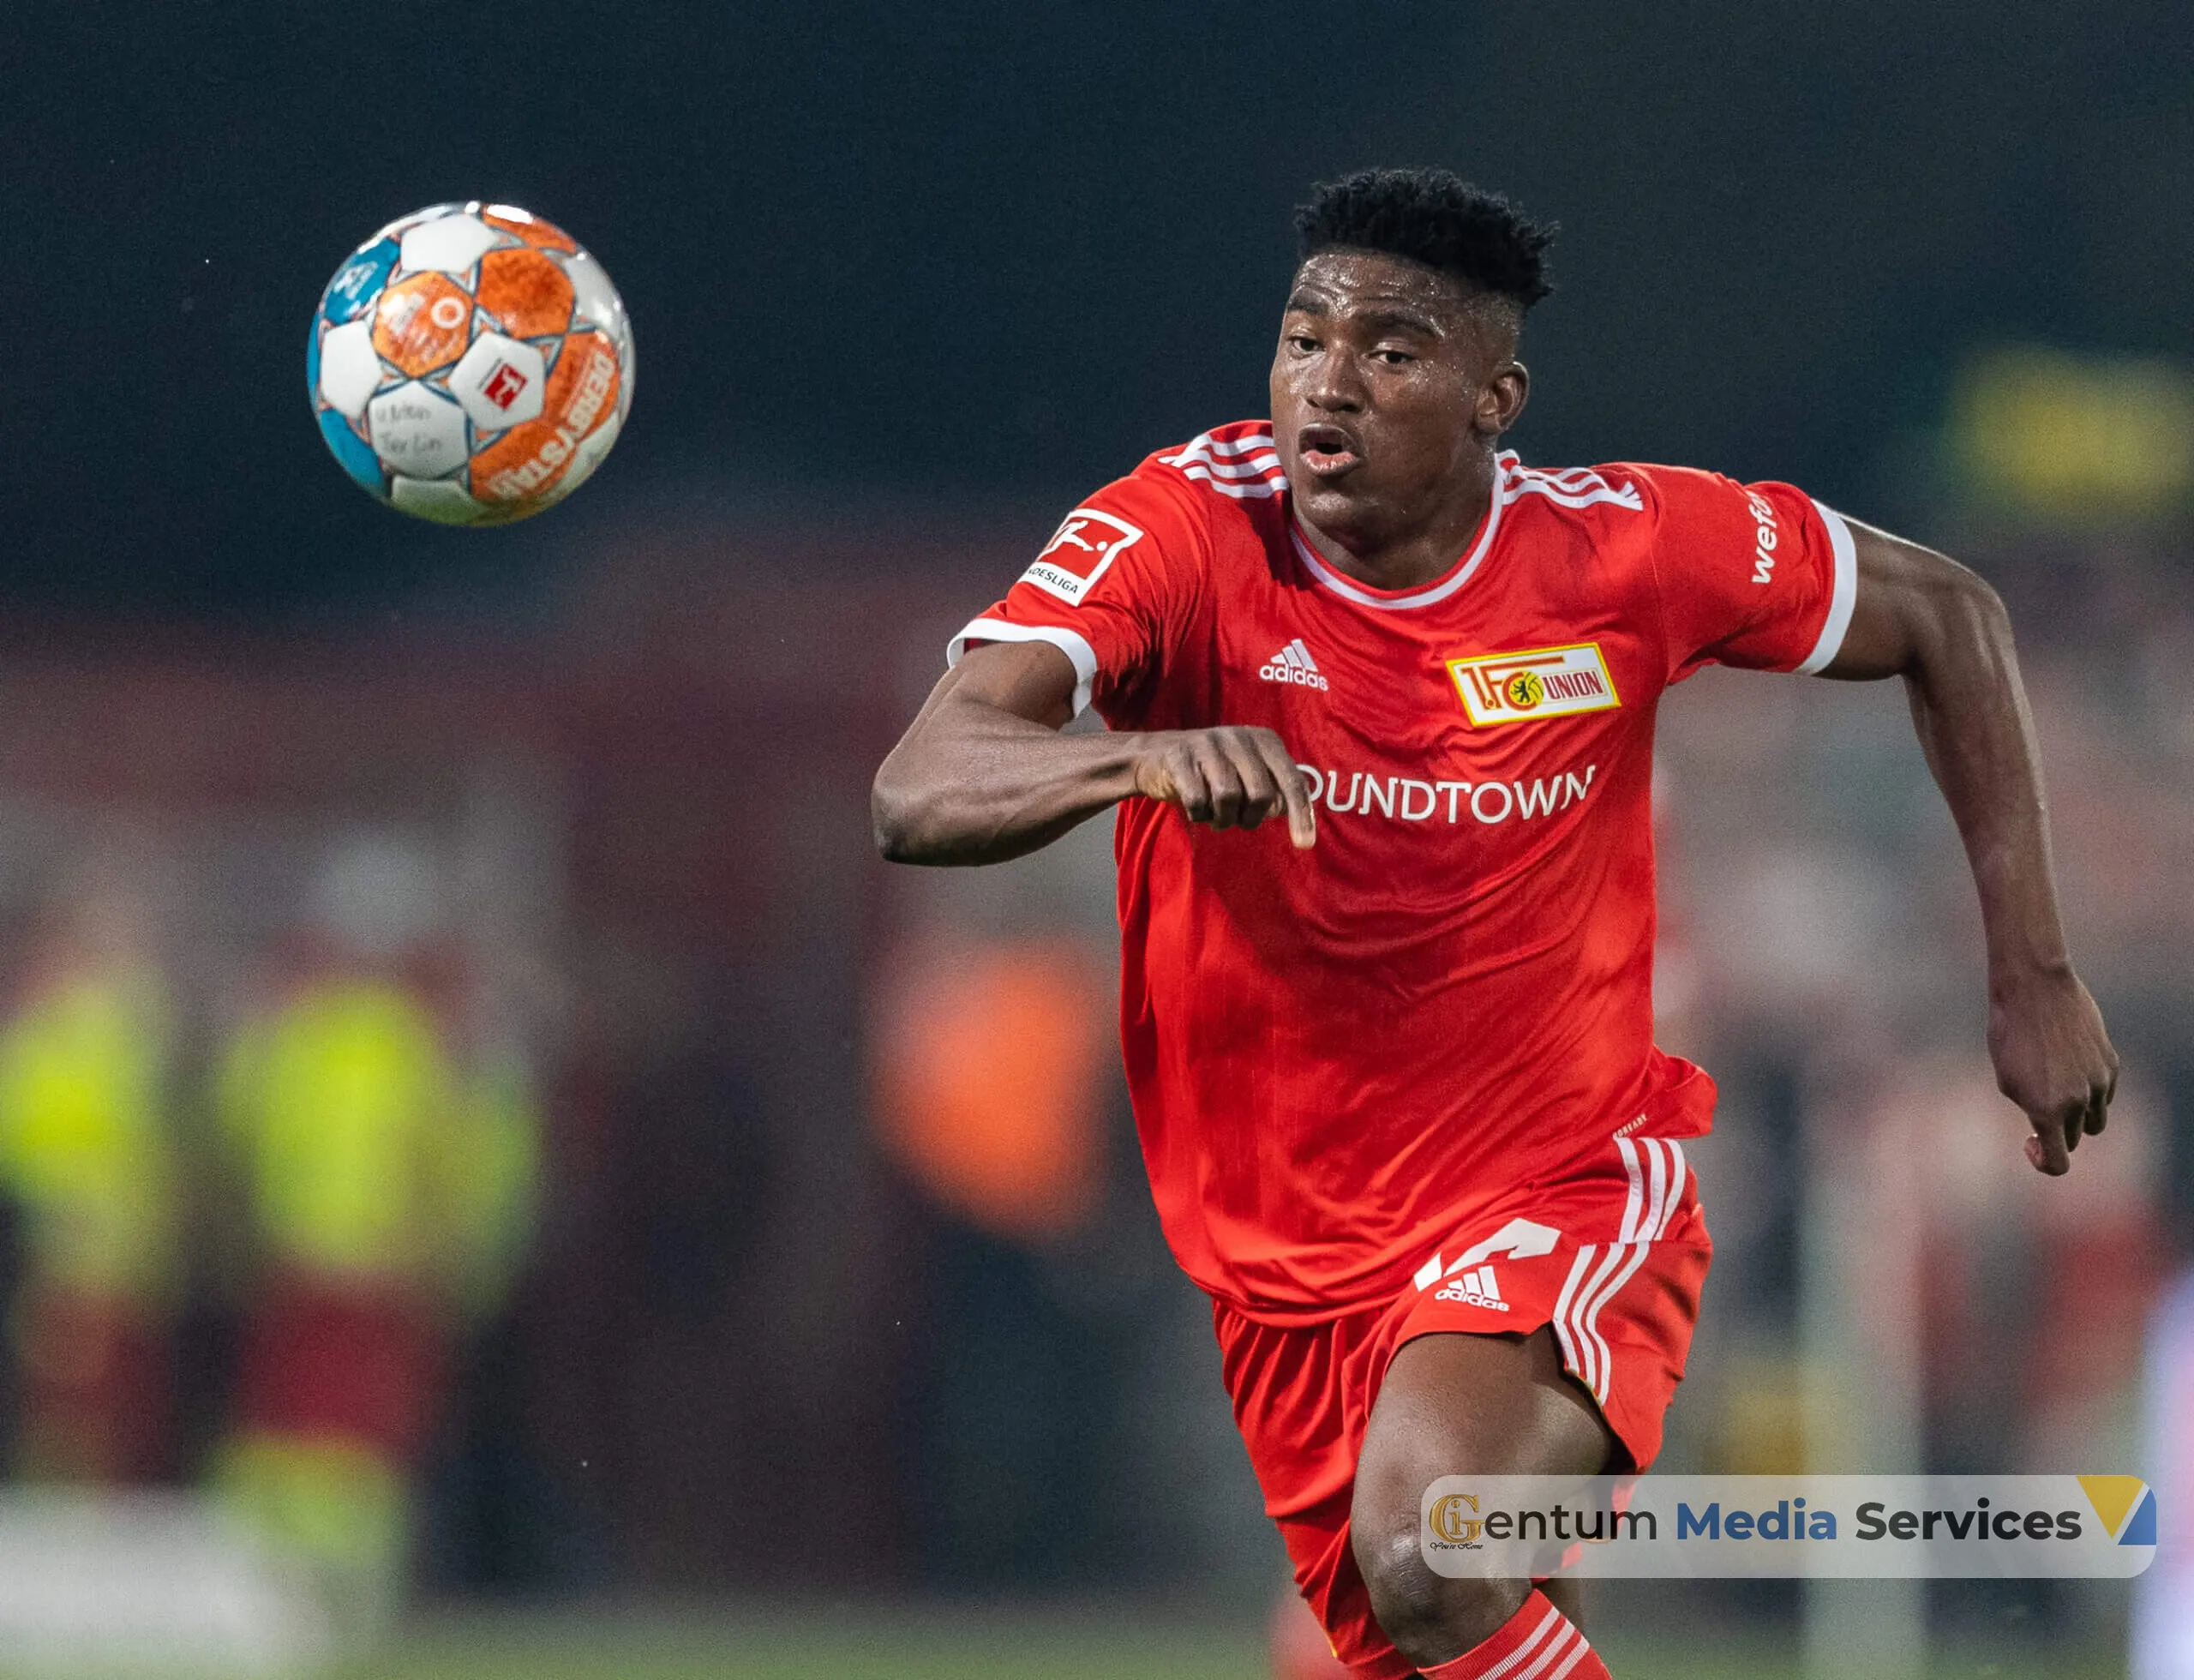 EPL: Awoniyi to be Sidelined for Two Months with Groin Injury